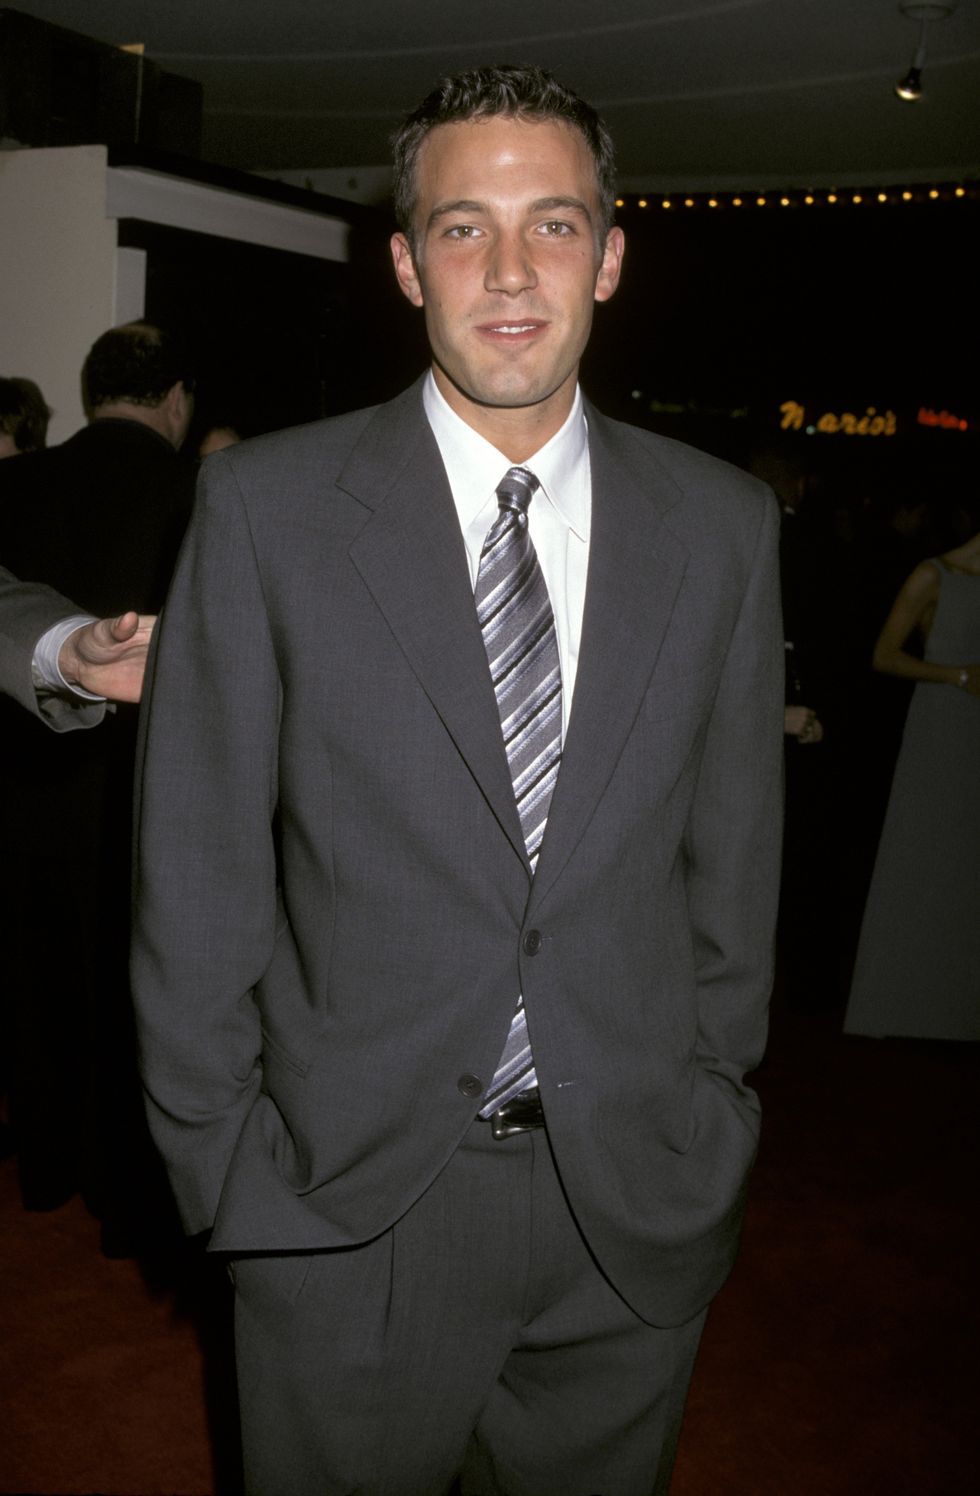 AFI Benefit Premiere of "Good Will Hunting"